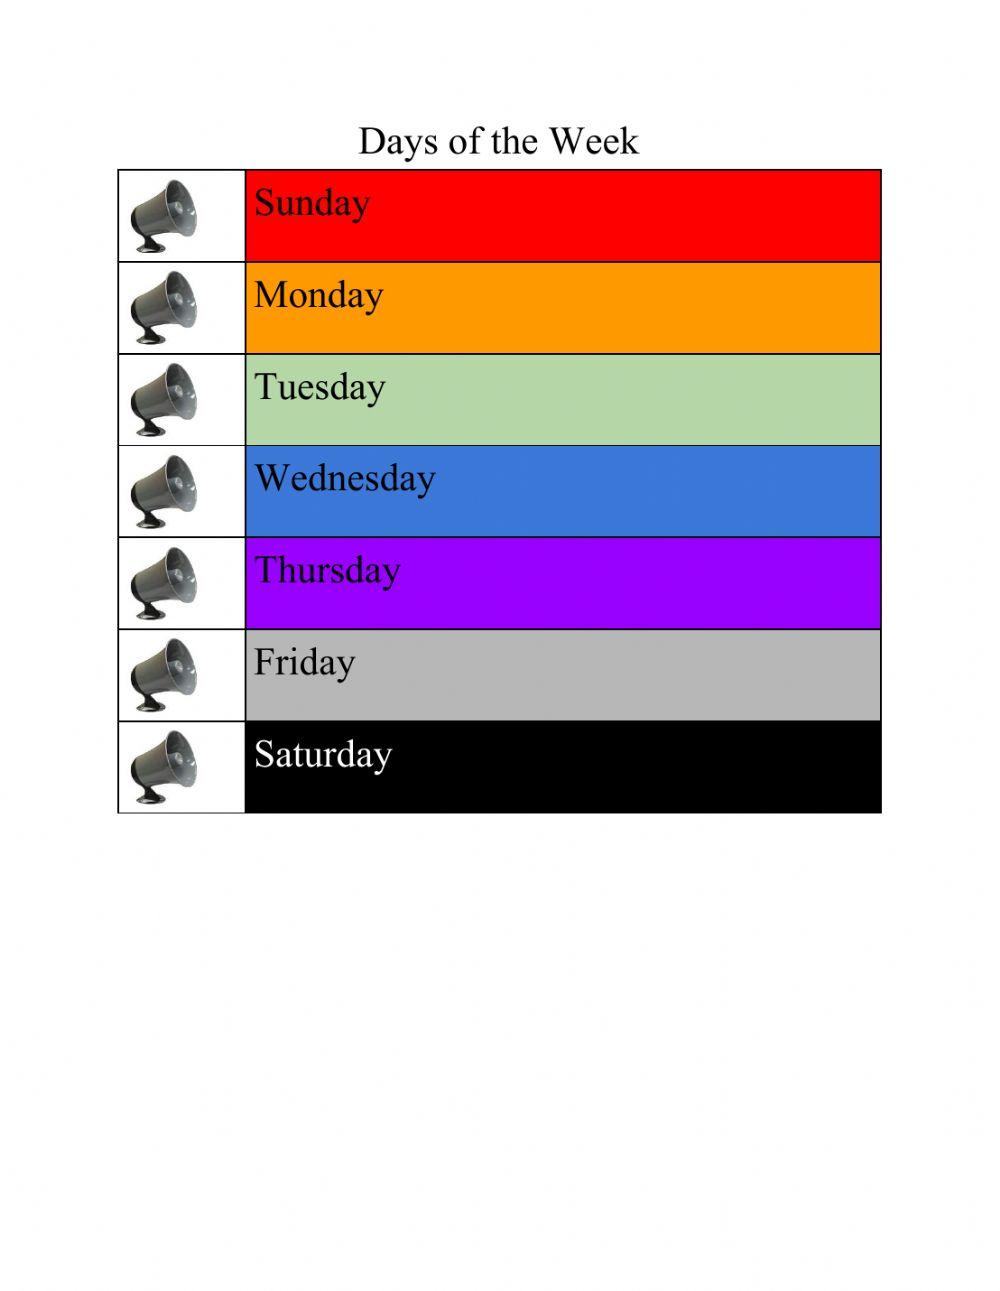 Days of the Week, with Colors